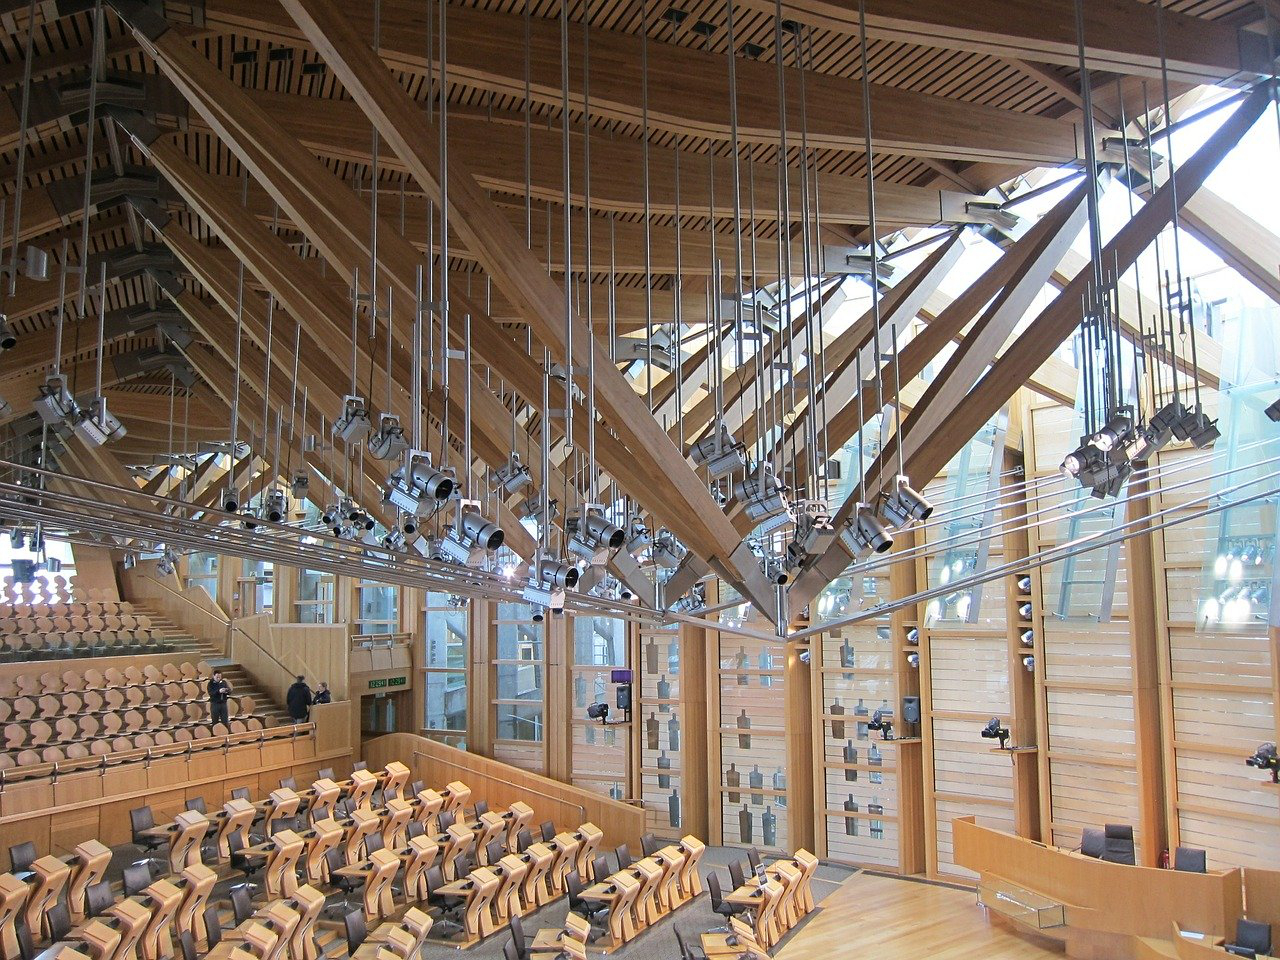 Holyrood committee votes in favour of short-term lets licensing scheme